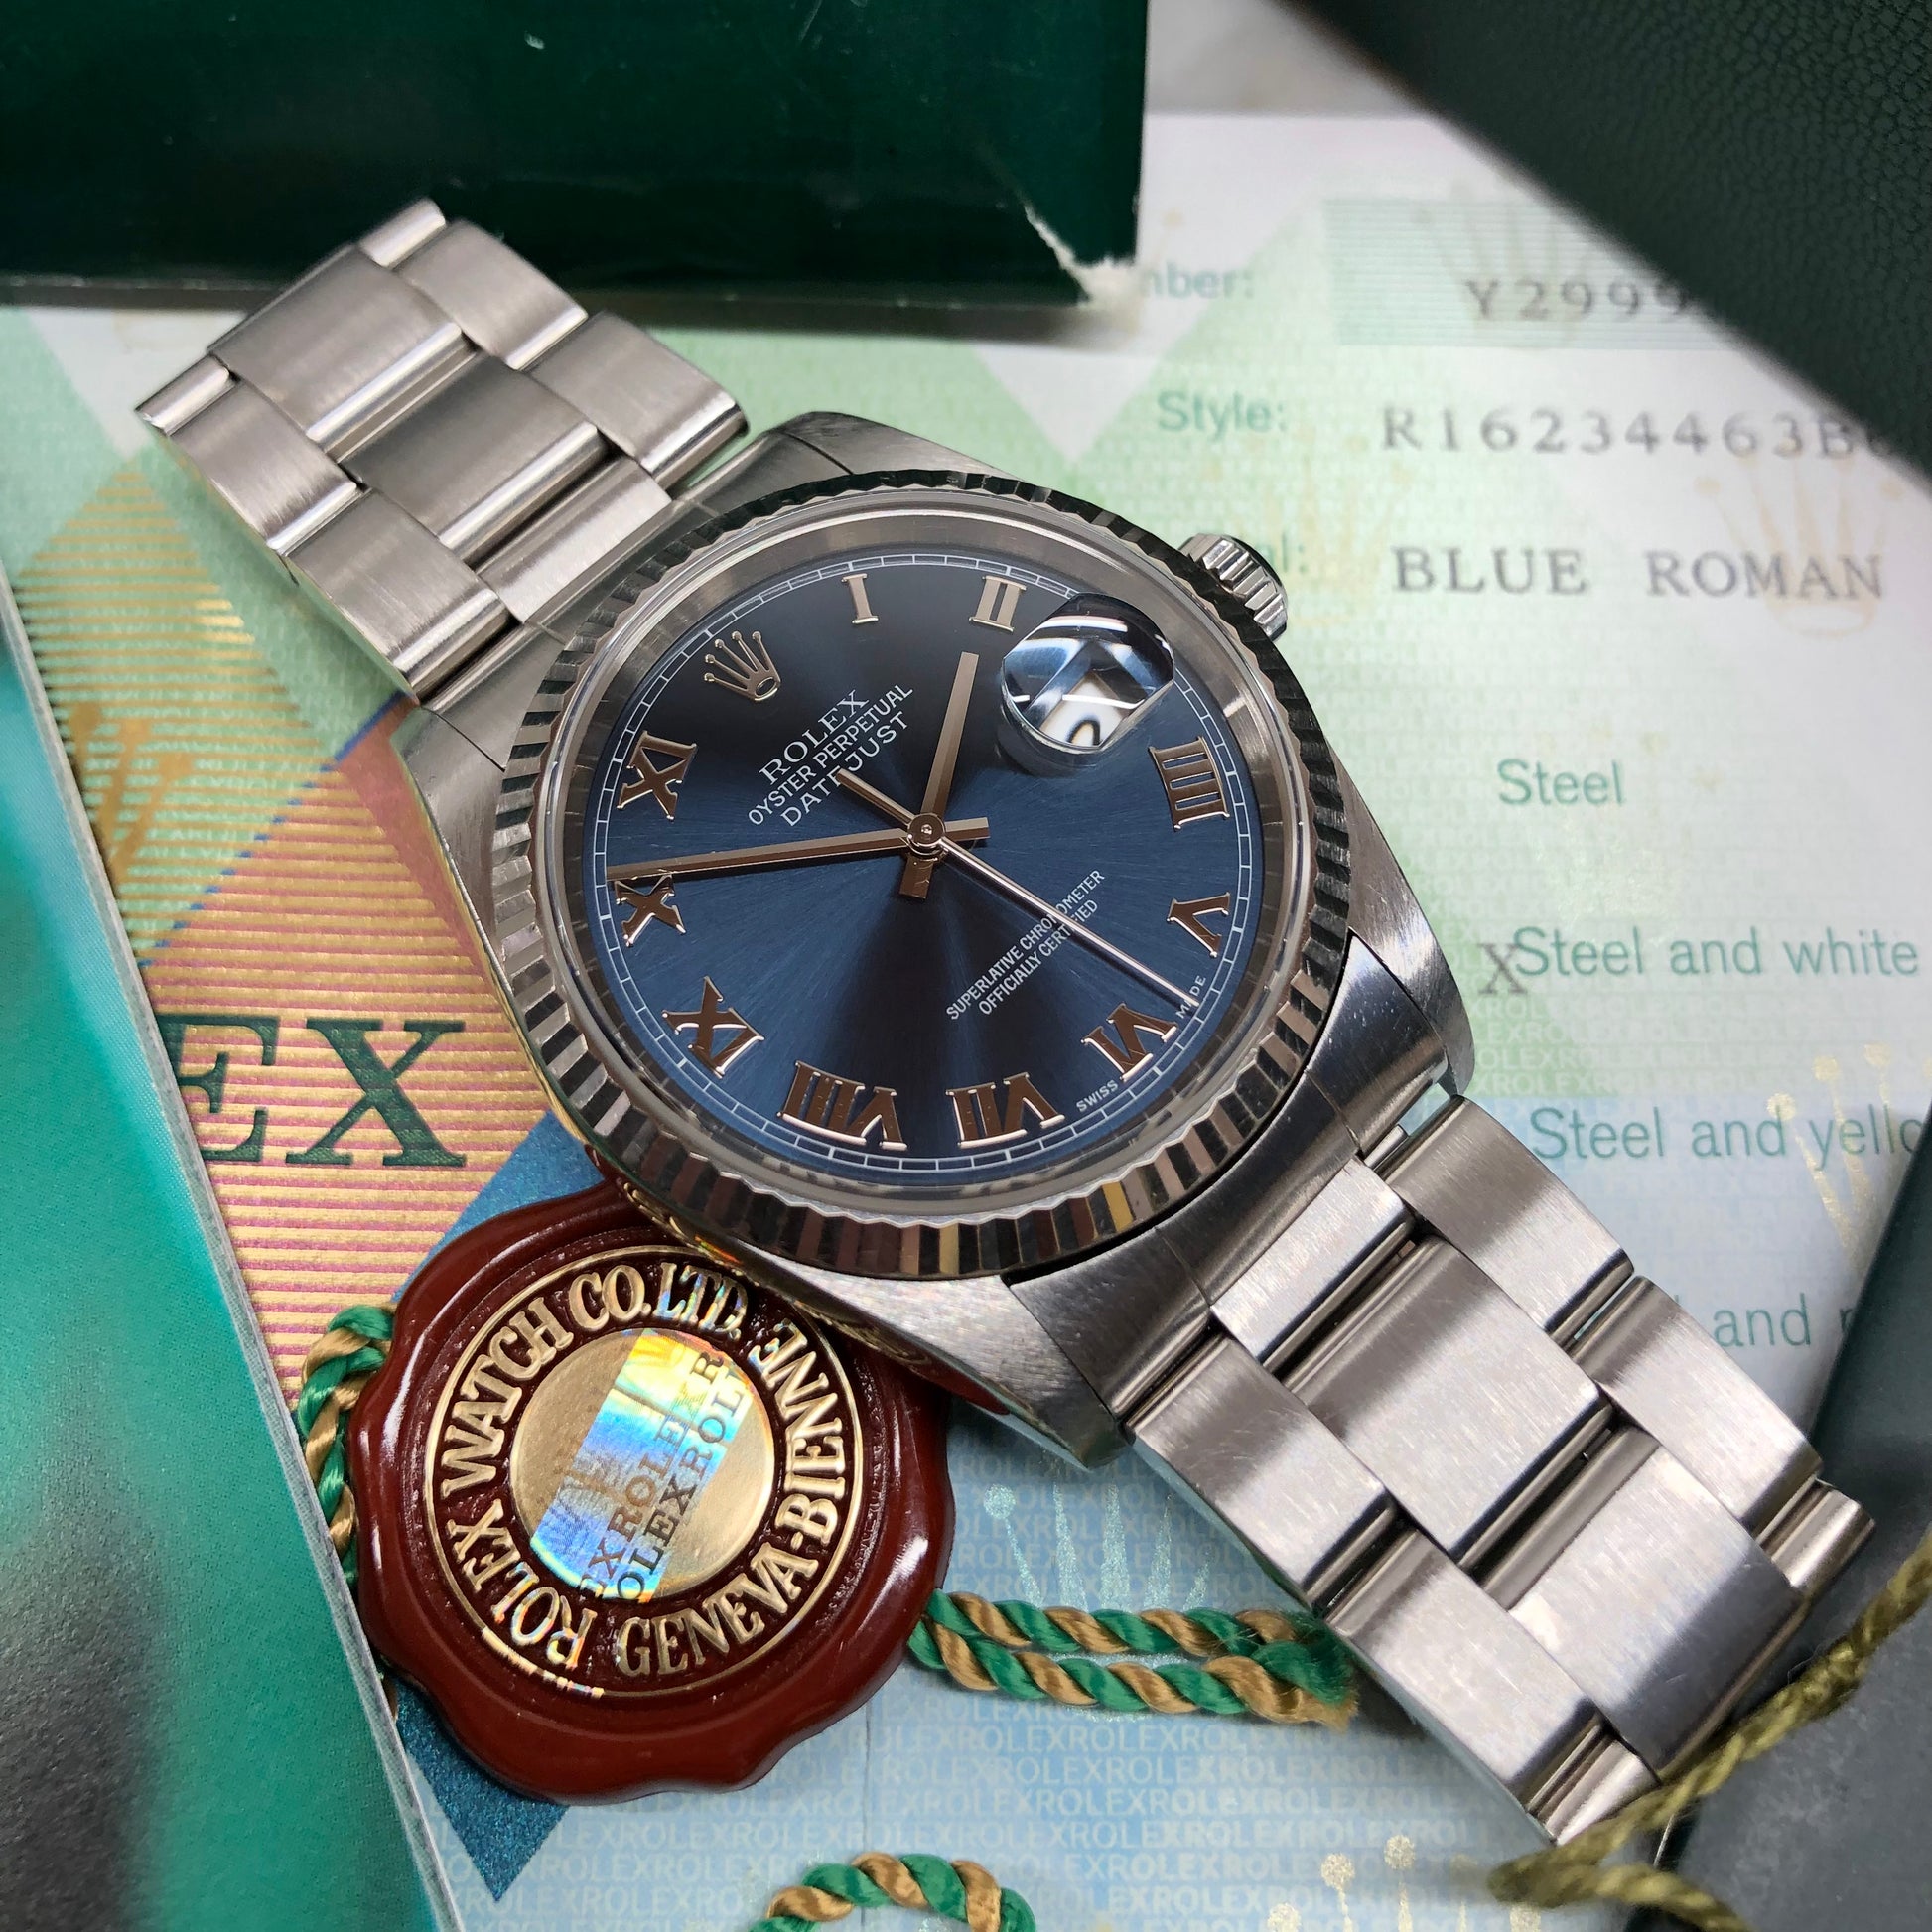 2002 Rolex Datejust 16234 Blue Roman Fluted White Gold Bezel Oyster Wristwatch Box Papers - Hashtag Watch Company